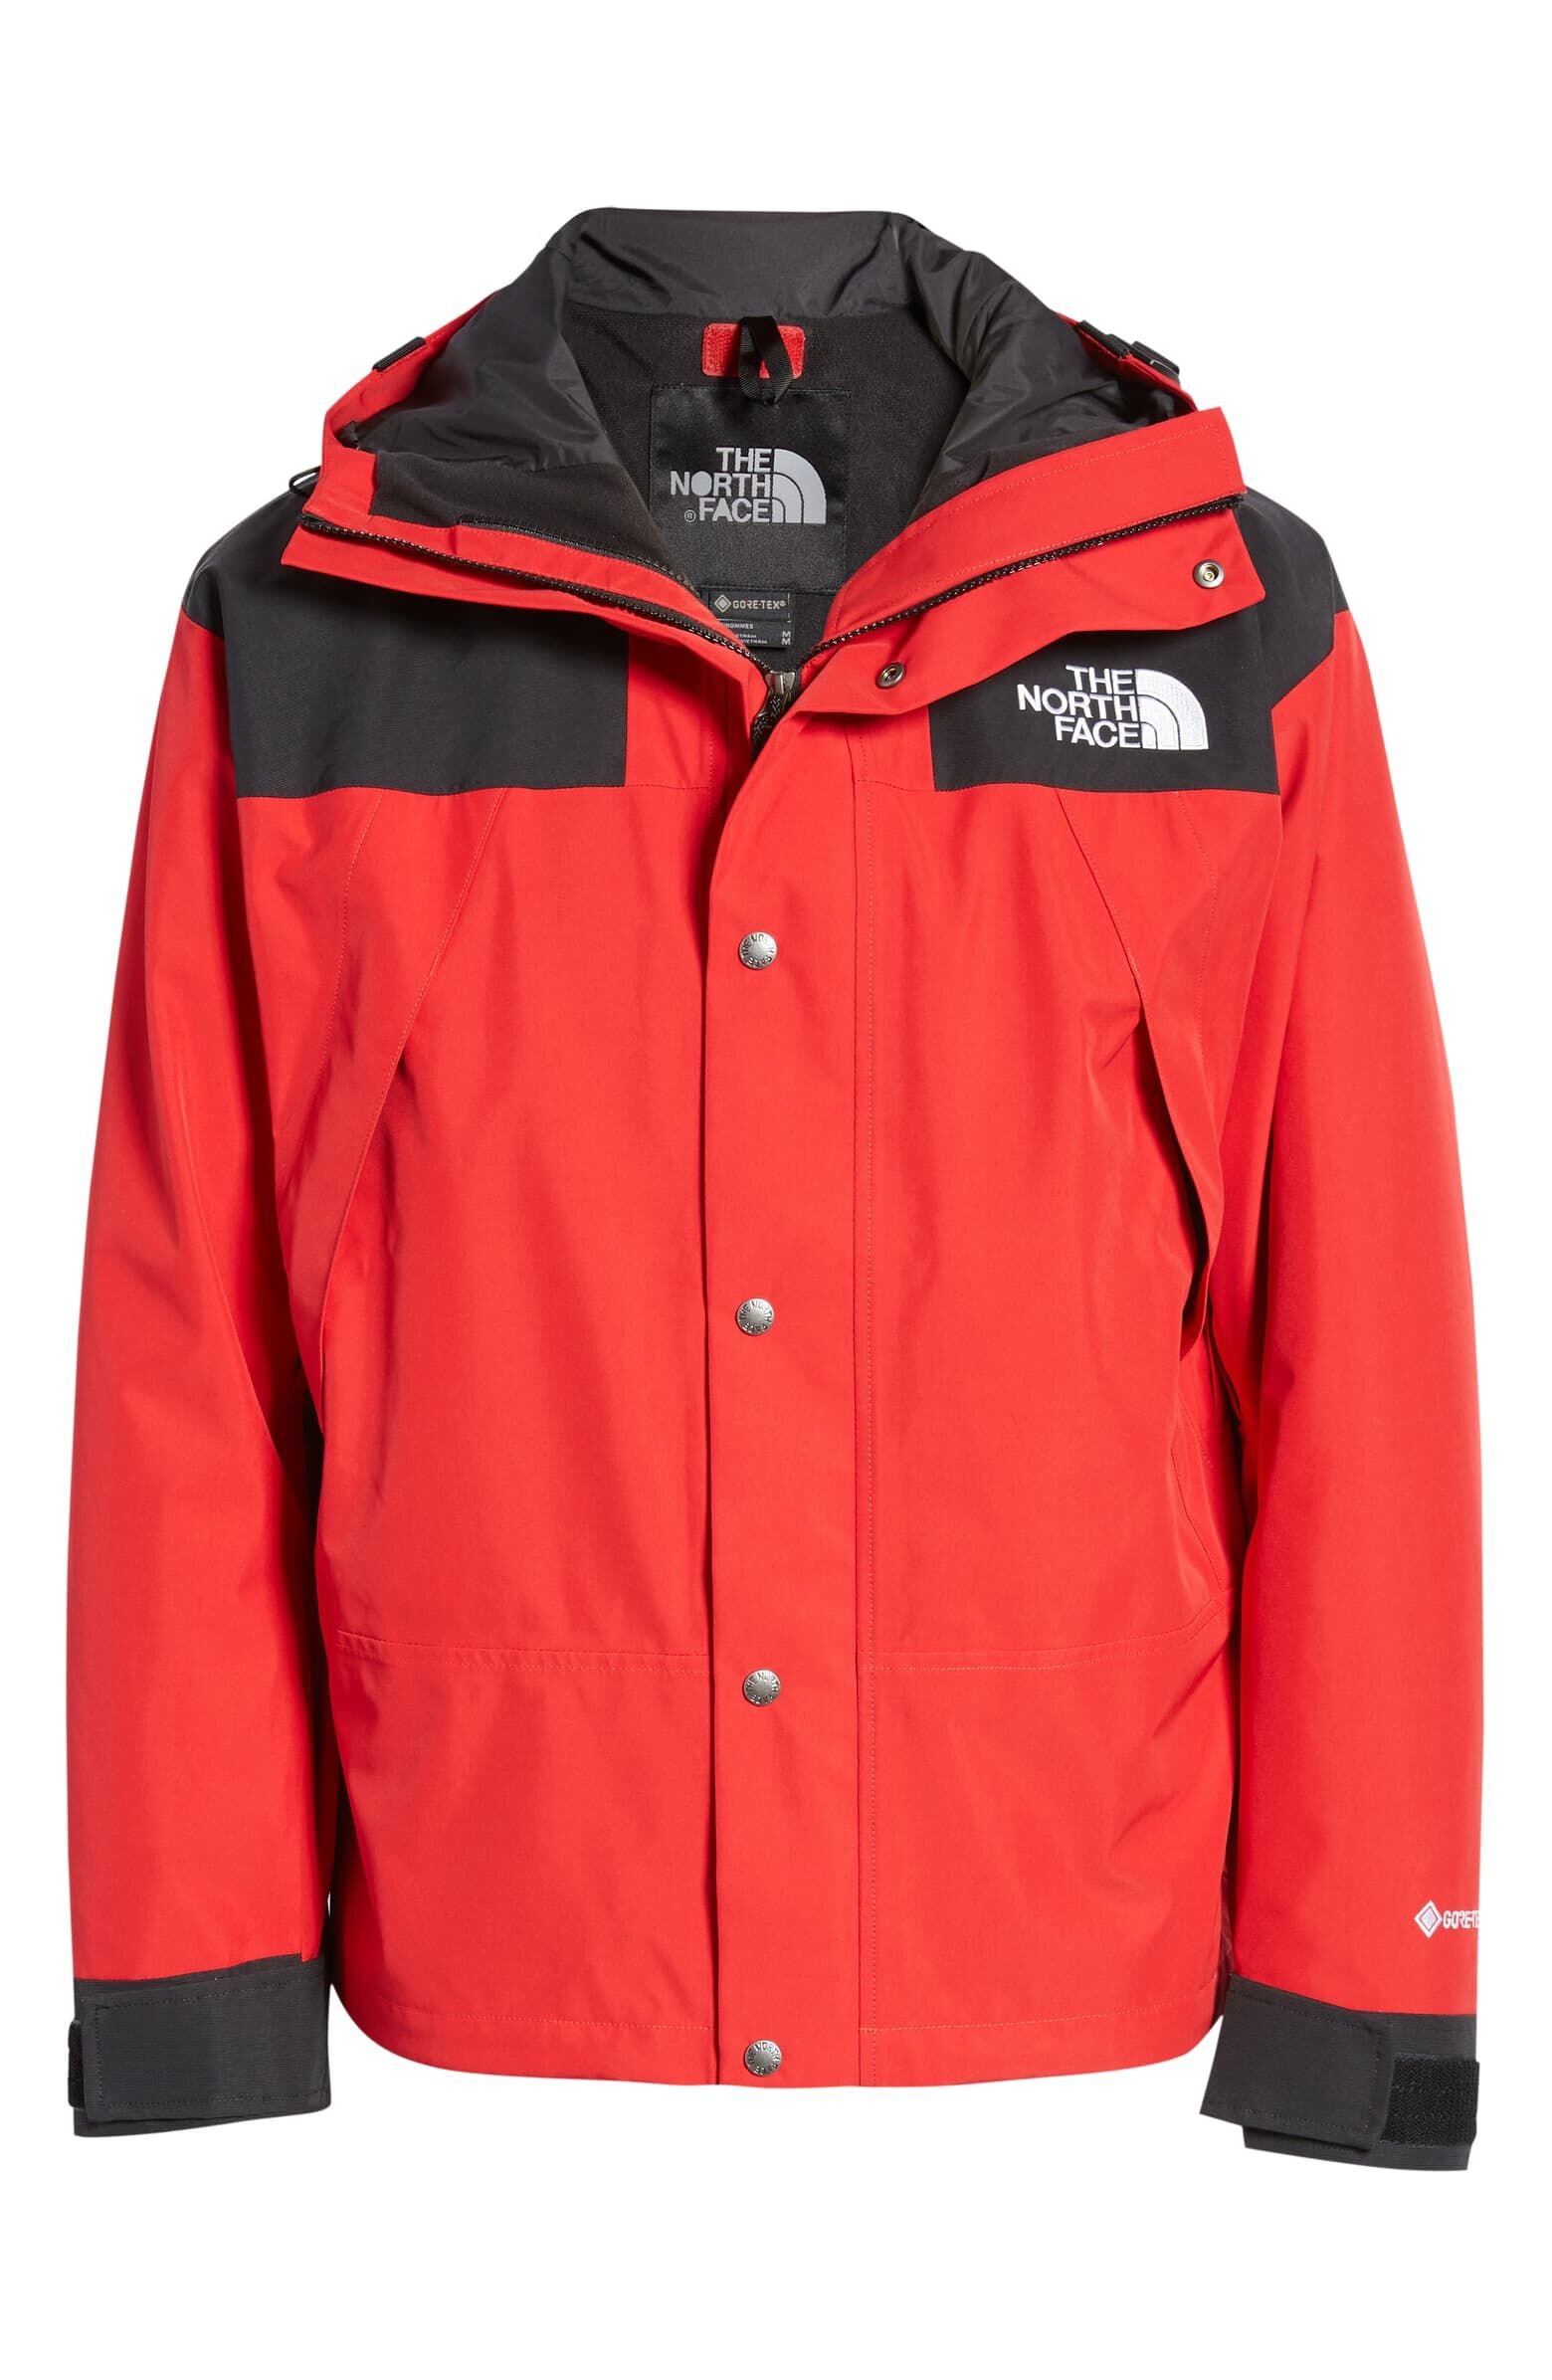 The North Face 1990 Mountain Gore-Tex® Jackets On Sale For 40% Off